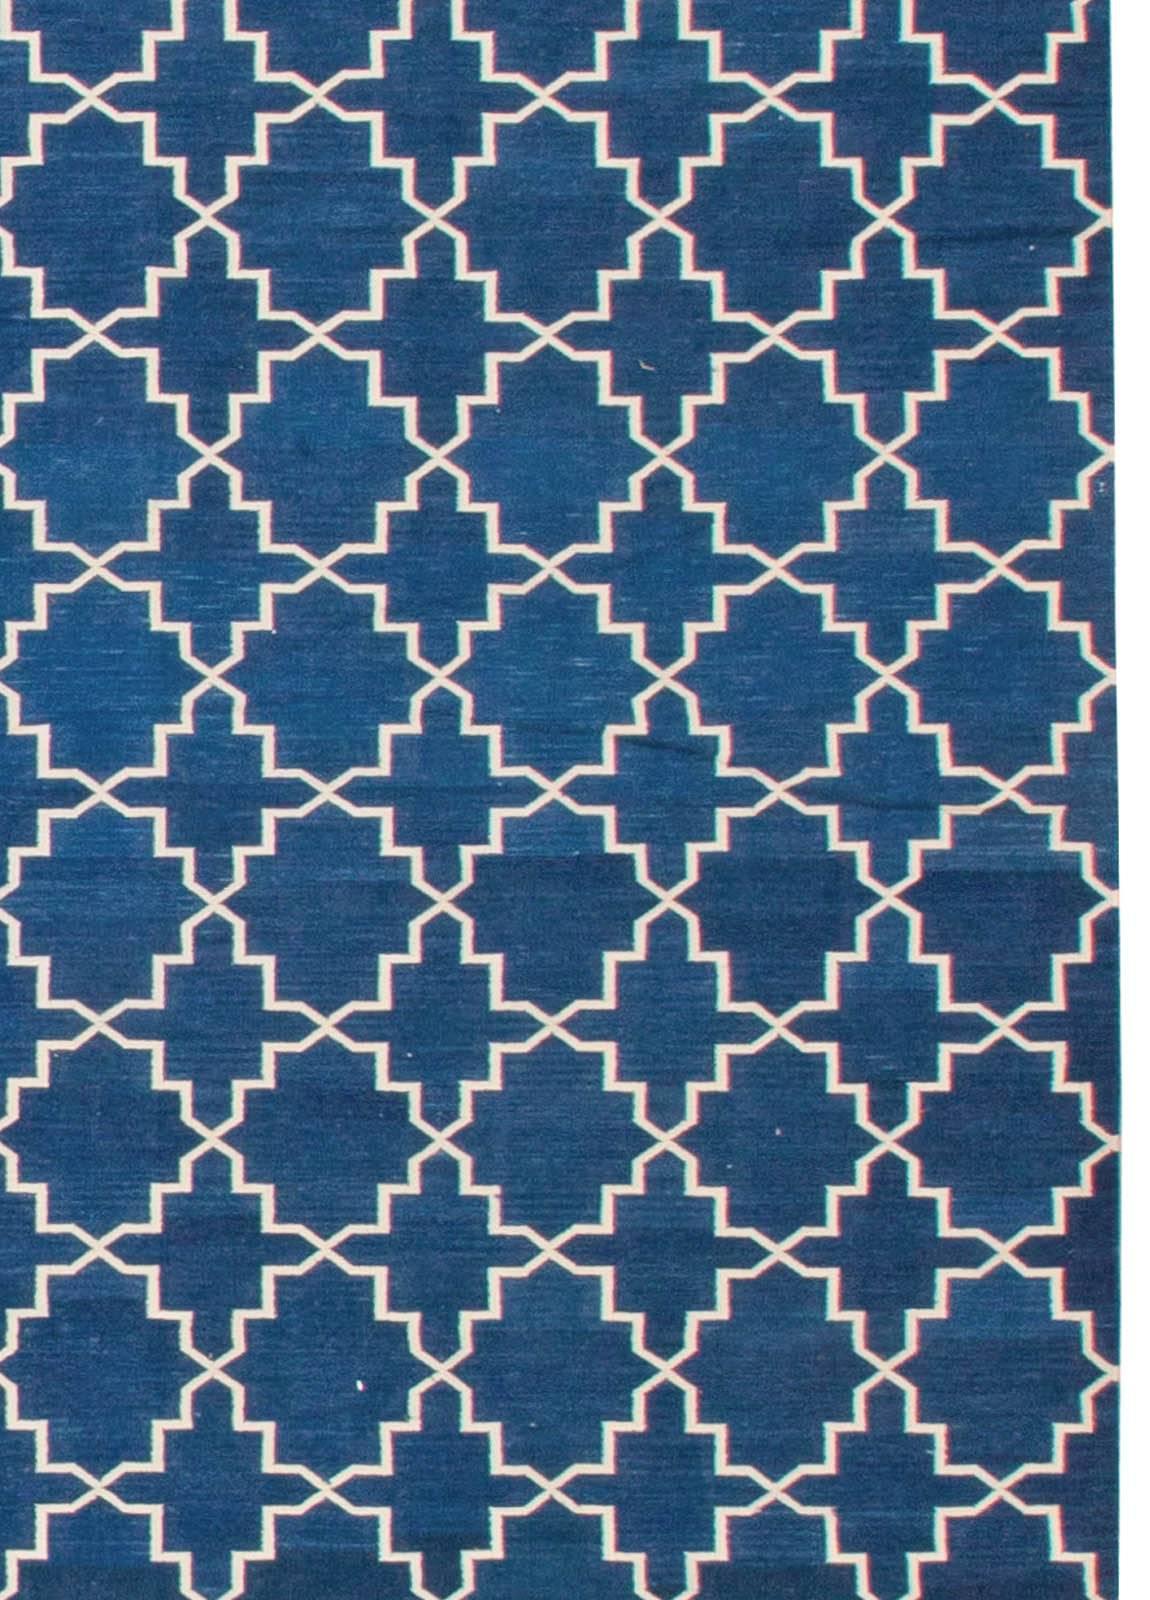 Hand-Woven Contemporary Indian Dhurrie Blue and White Handmade Rug by Doris Leslie Blau For Sale